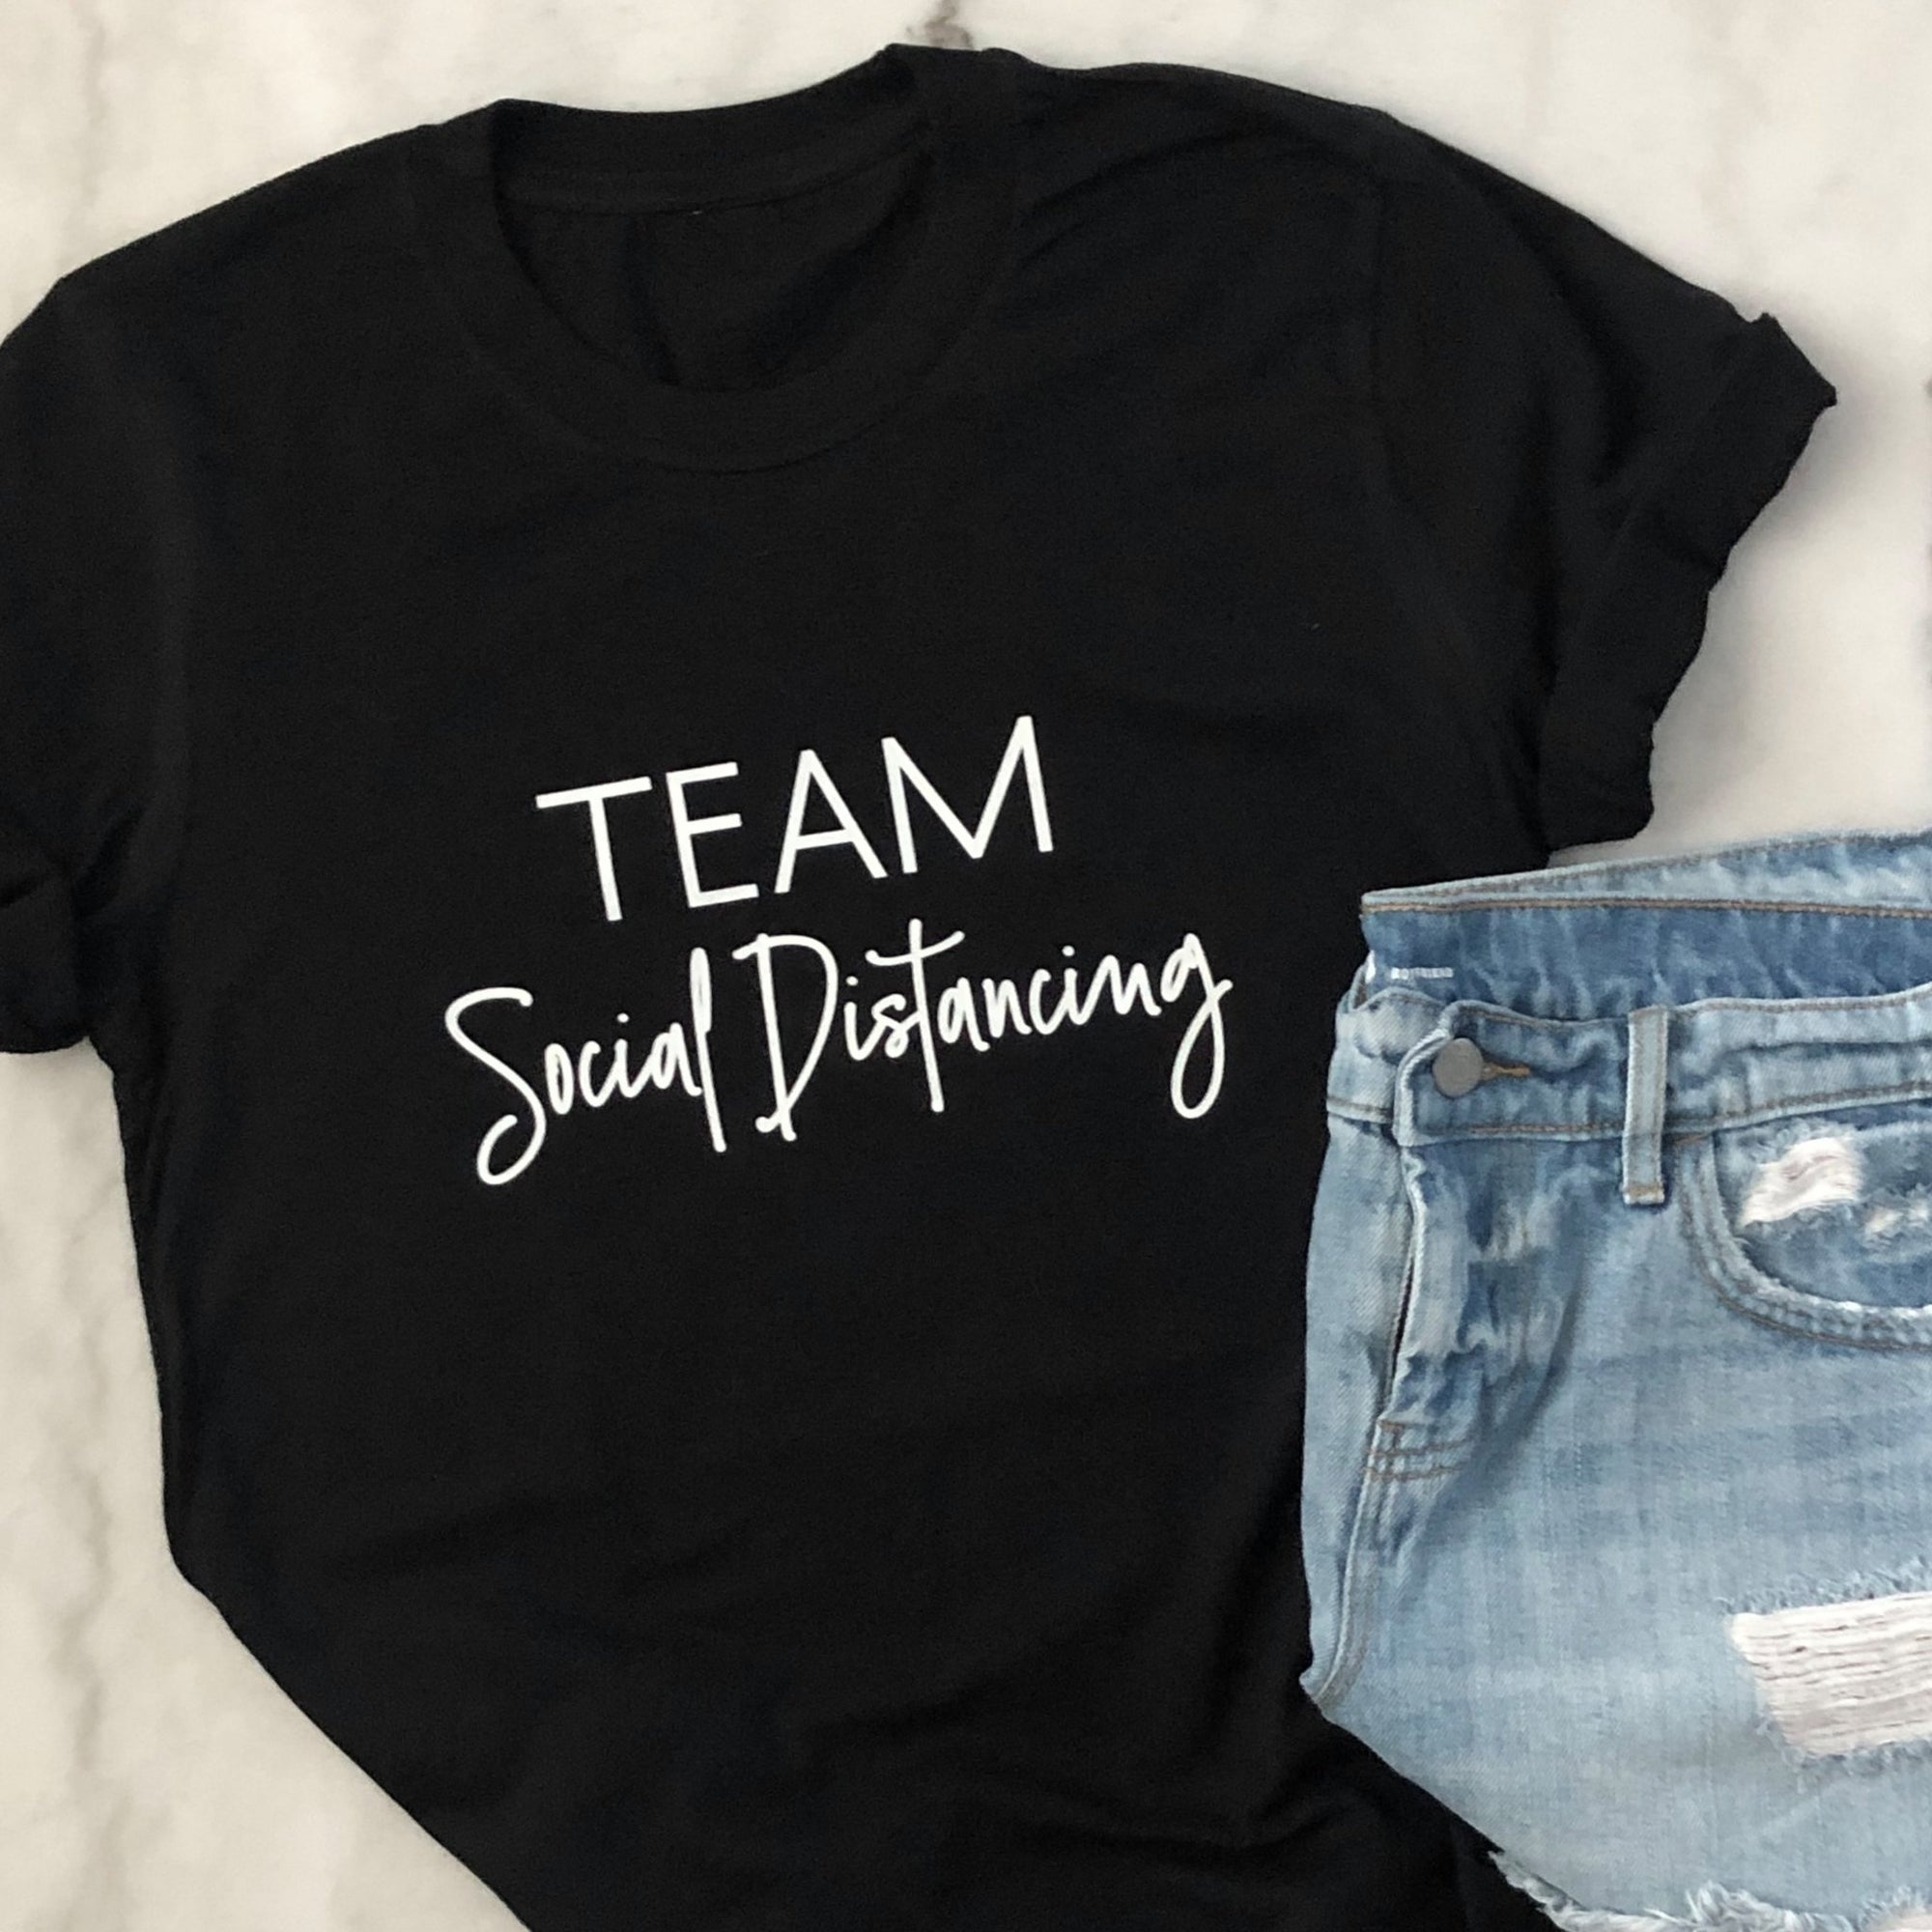 Team Social Distancing Shirt - Pretty Collected